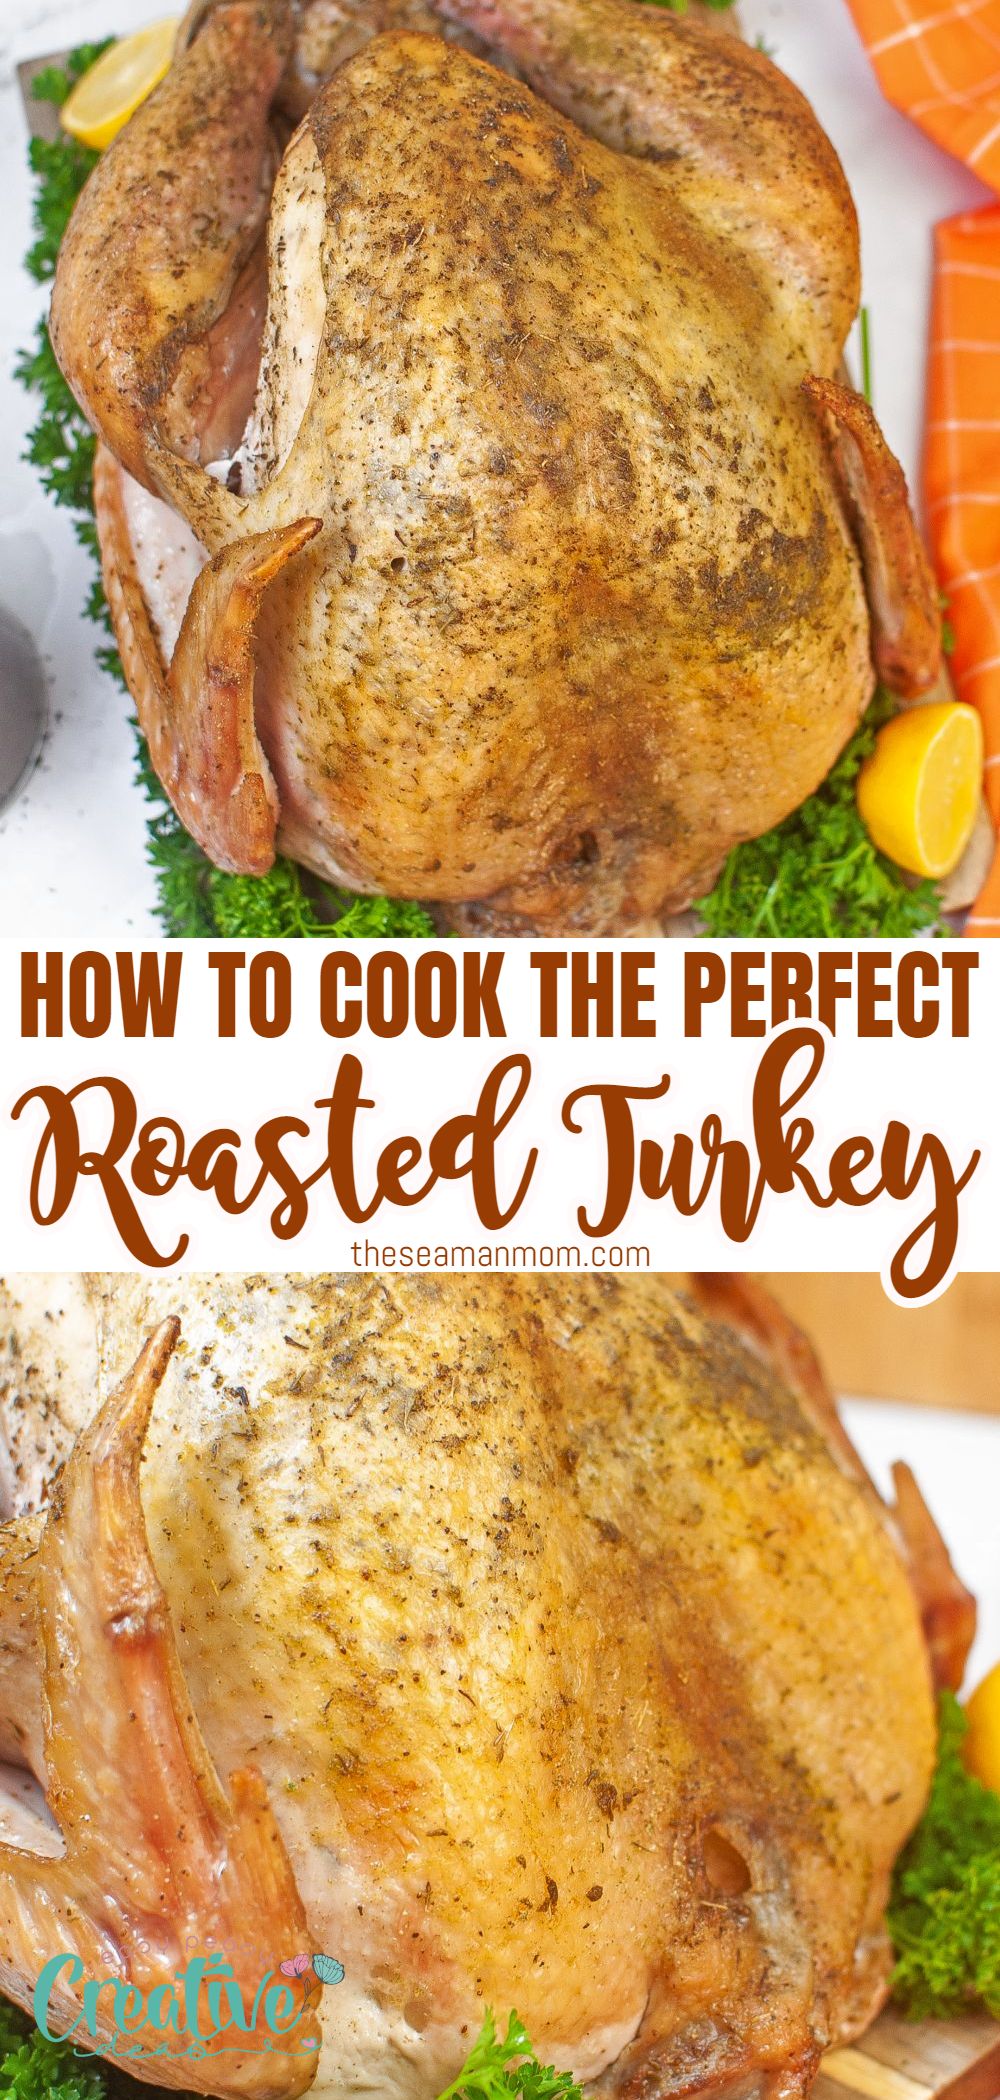 Thanksgiving is just around the corner, and that means it's time to start thinking about your holiday menu. A roasted turkey is a classic centerpiece for any feast, and with this recipe, you'll be sure to impress your guests. This herb-roasted turkey is juicy and full of flavor, and it's sure to be a hit at your next holiday gathering. So, what are you waiting for? Get roasting! via @petroneagu